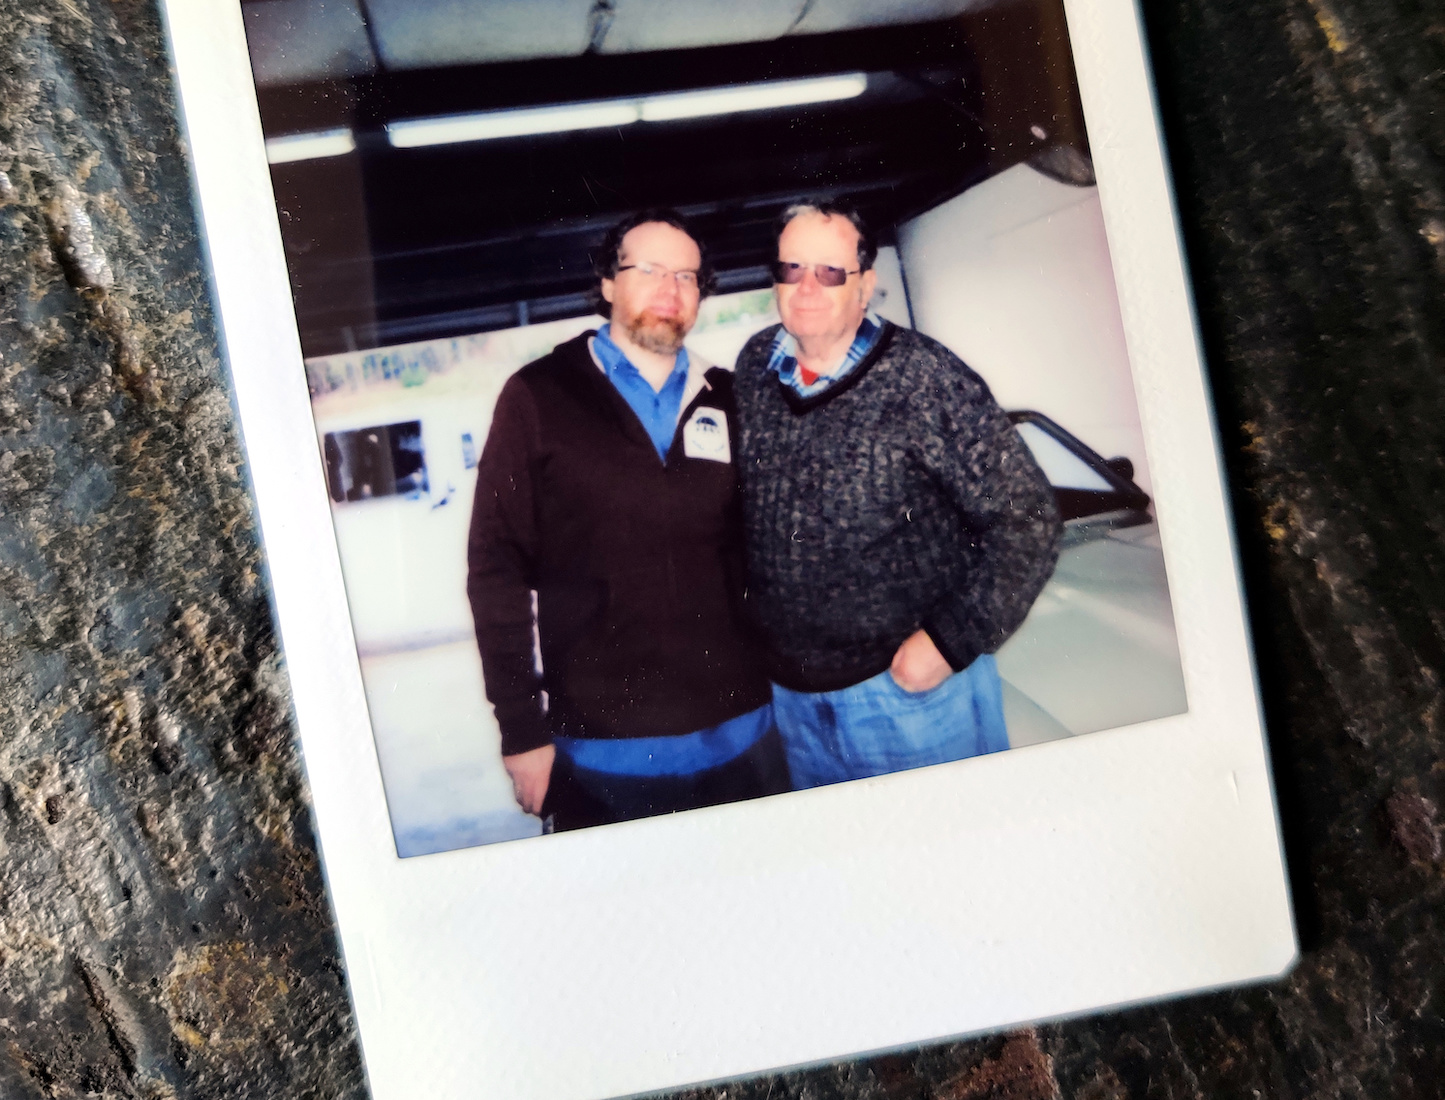 Writer Benjamin Hunting and his dad in a Polaroid